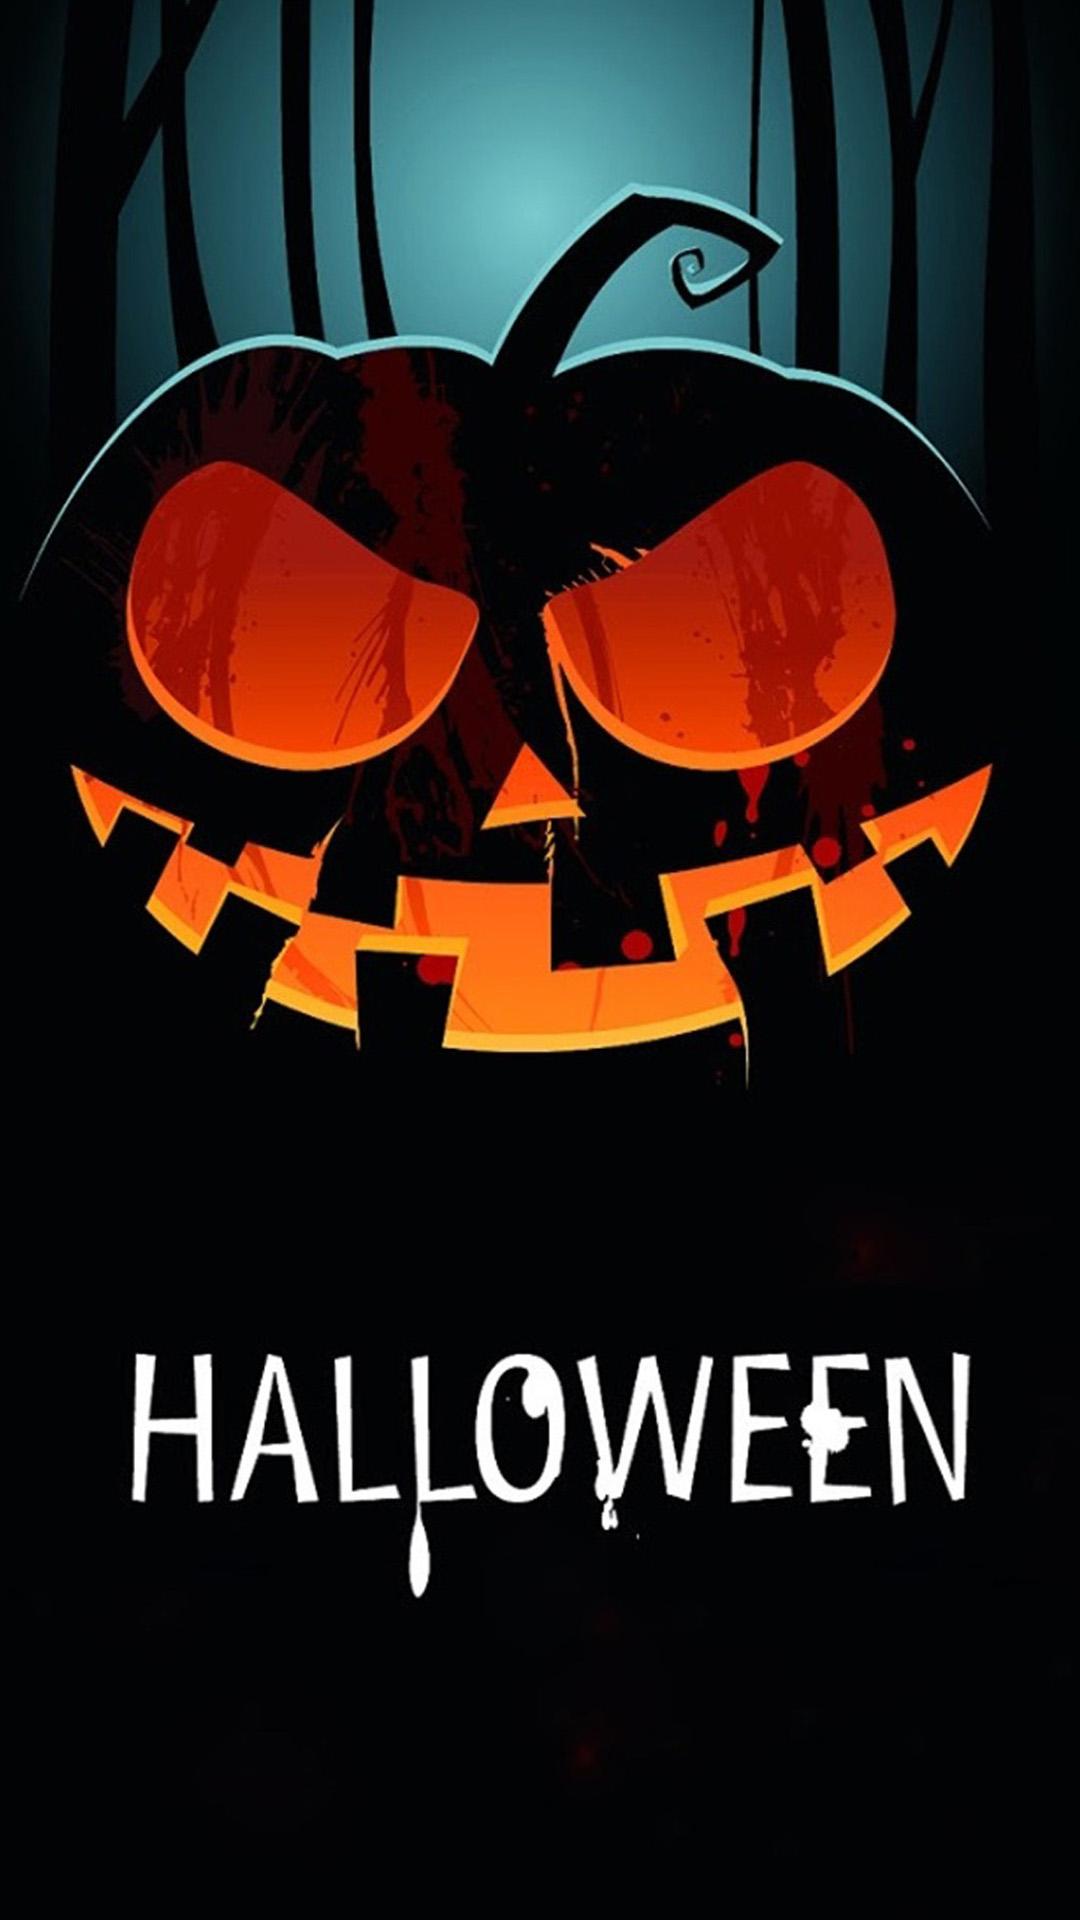 Halloween Pumpkin htc one wallpaper, free and easy to download